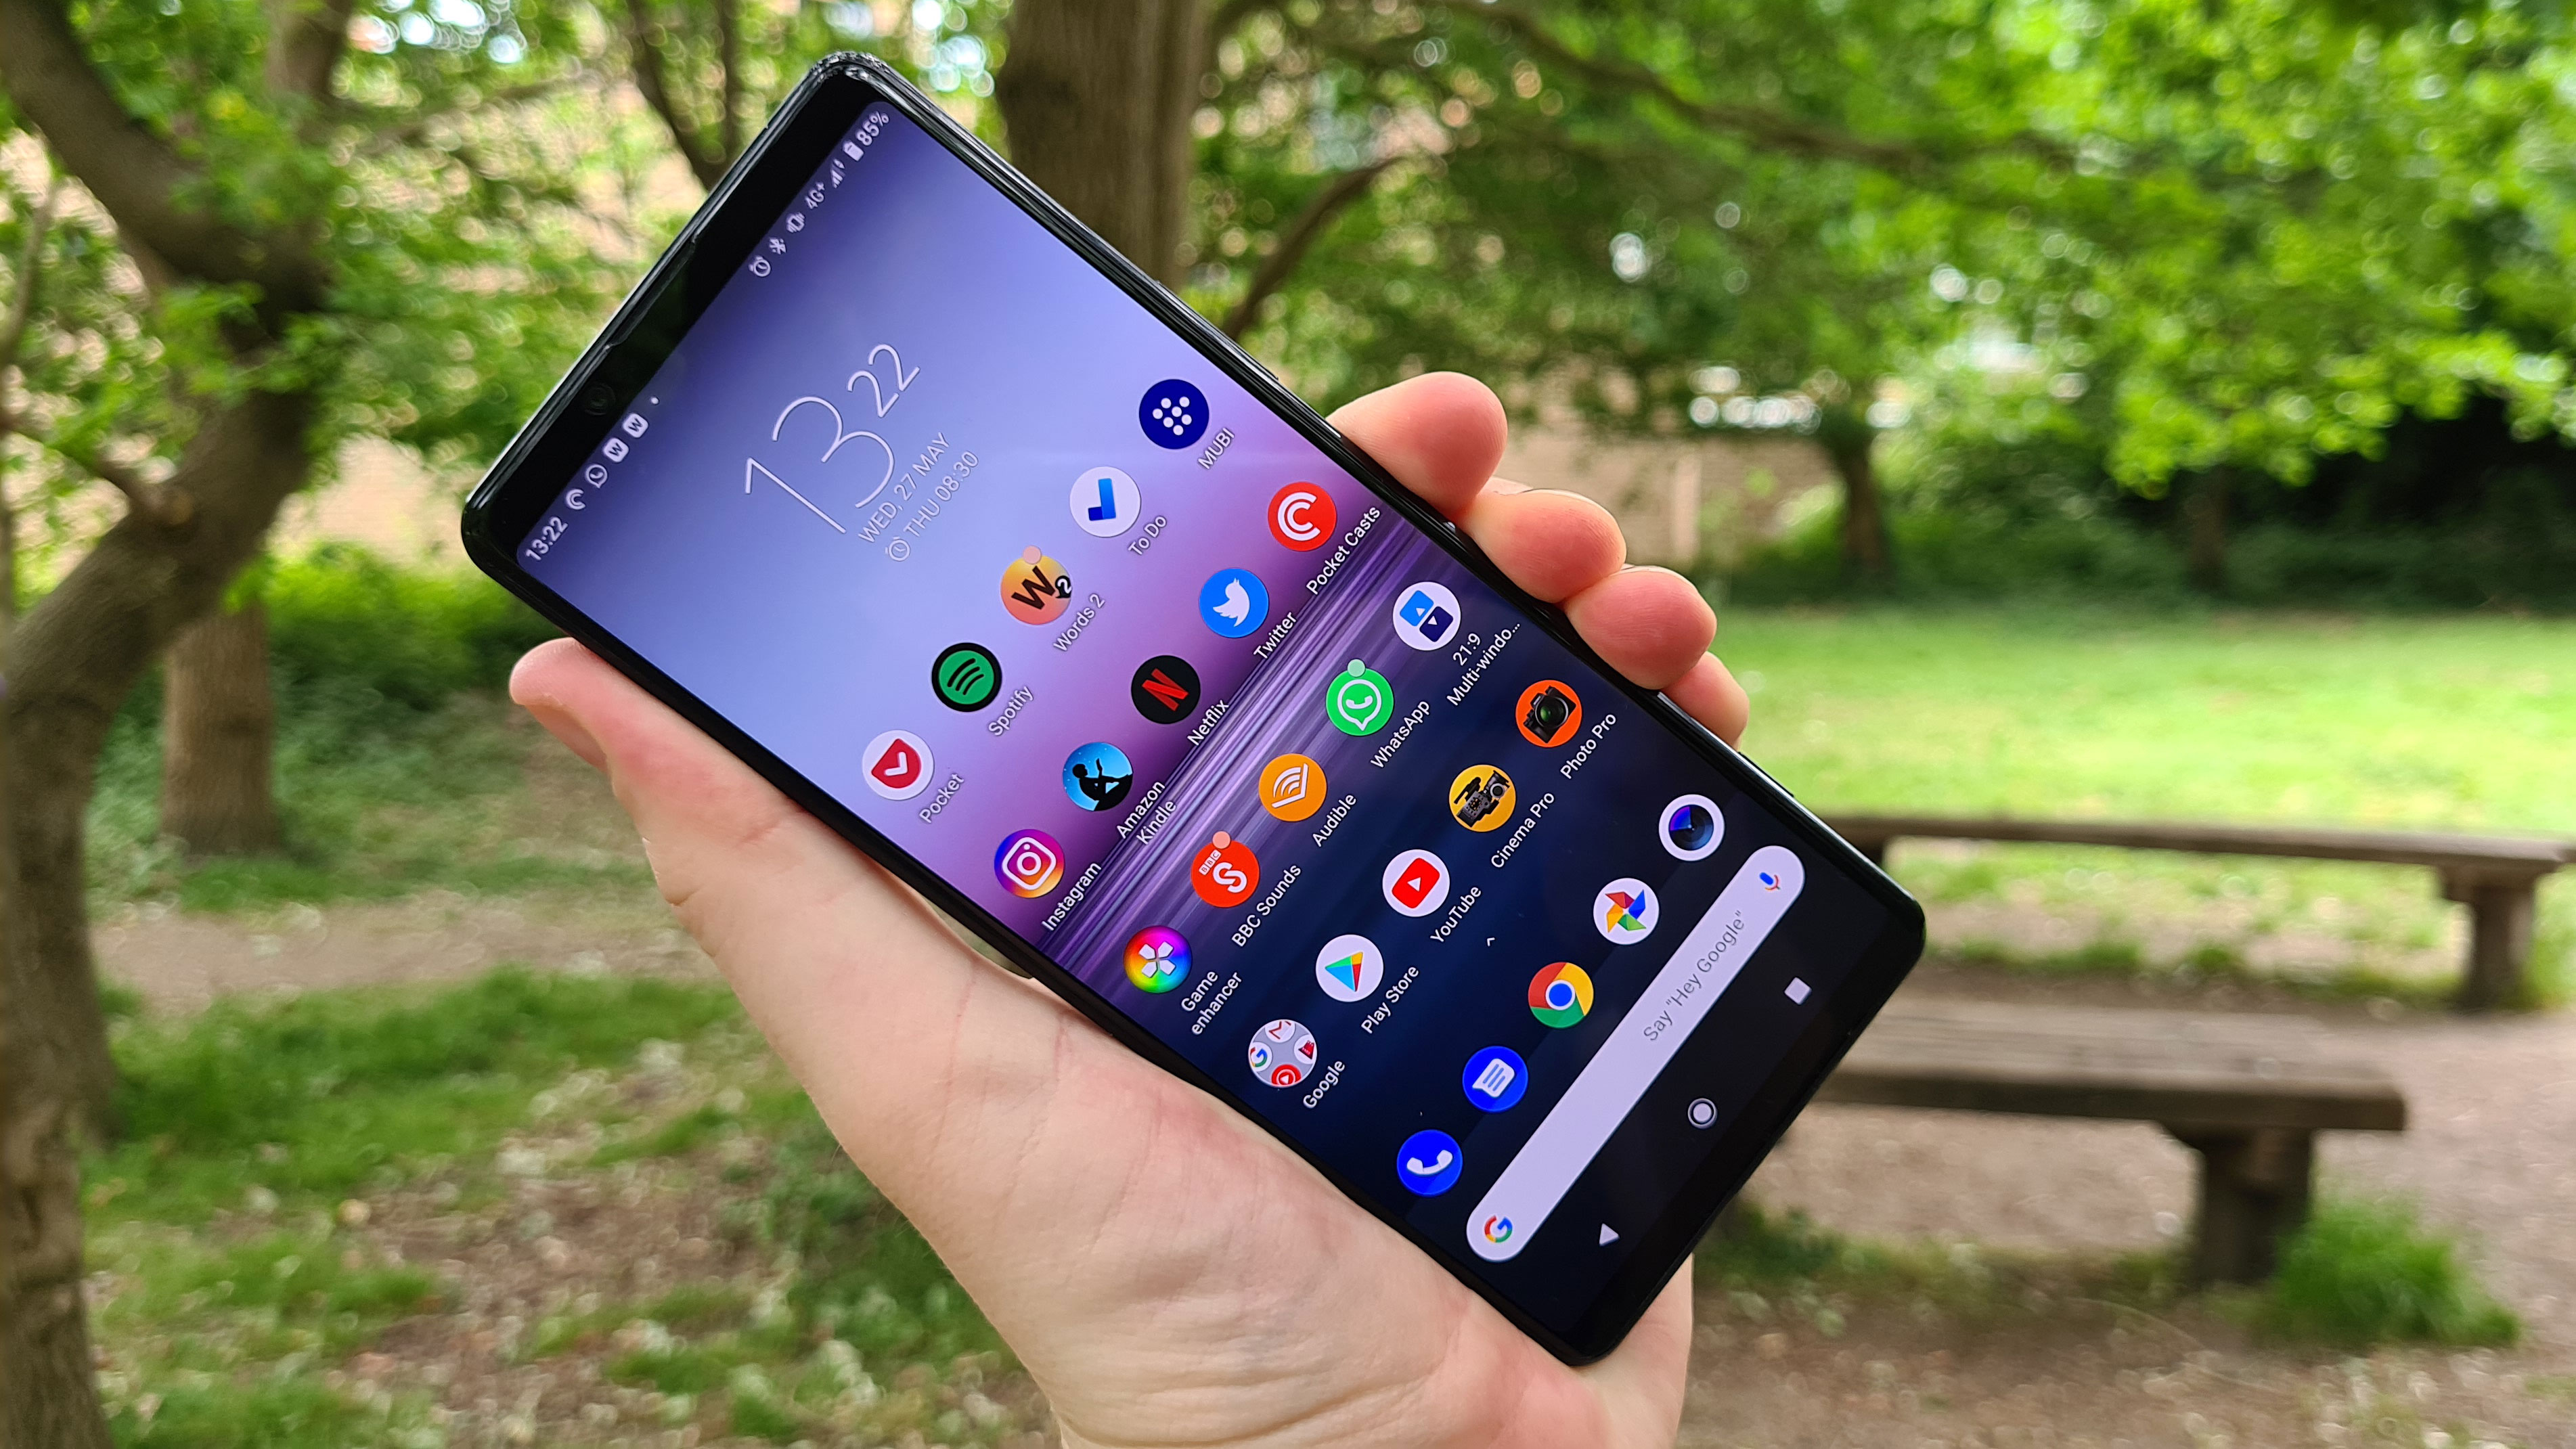 Sony Xperia 1 II and Xperia 5 II could get Android 11, 12 and 13